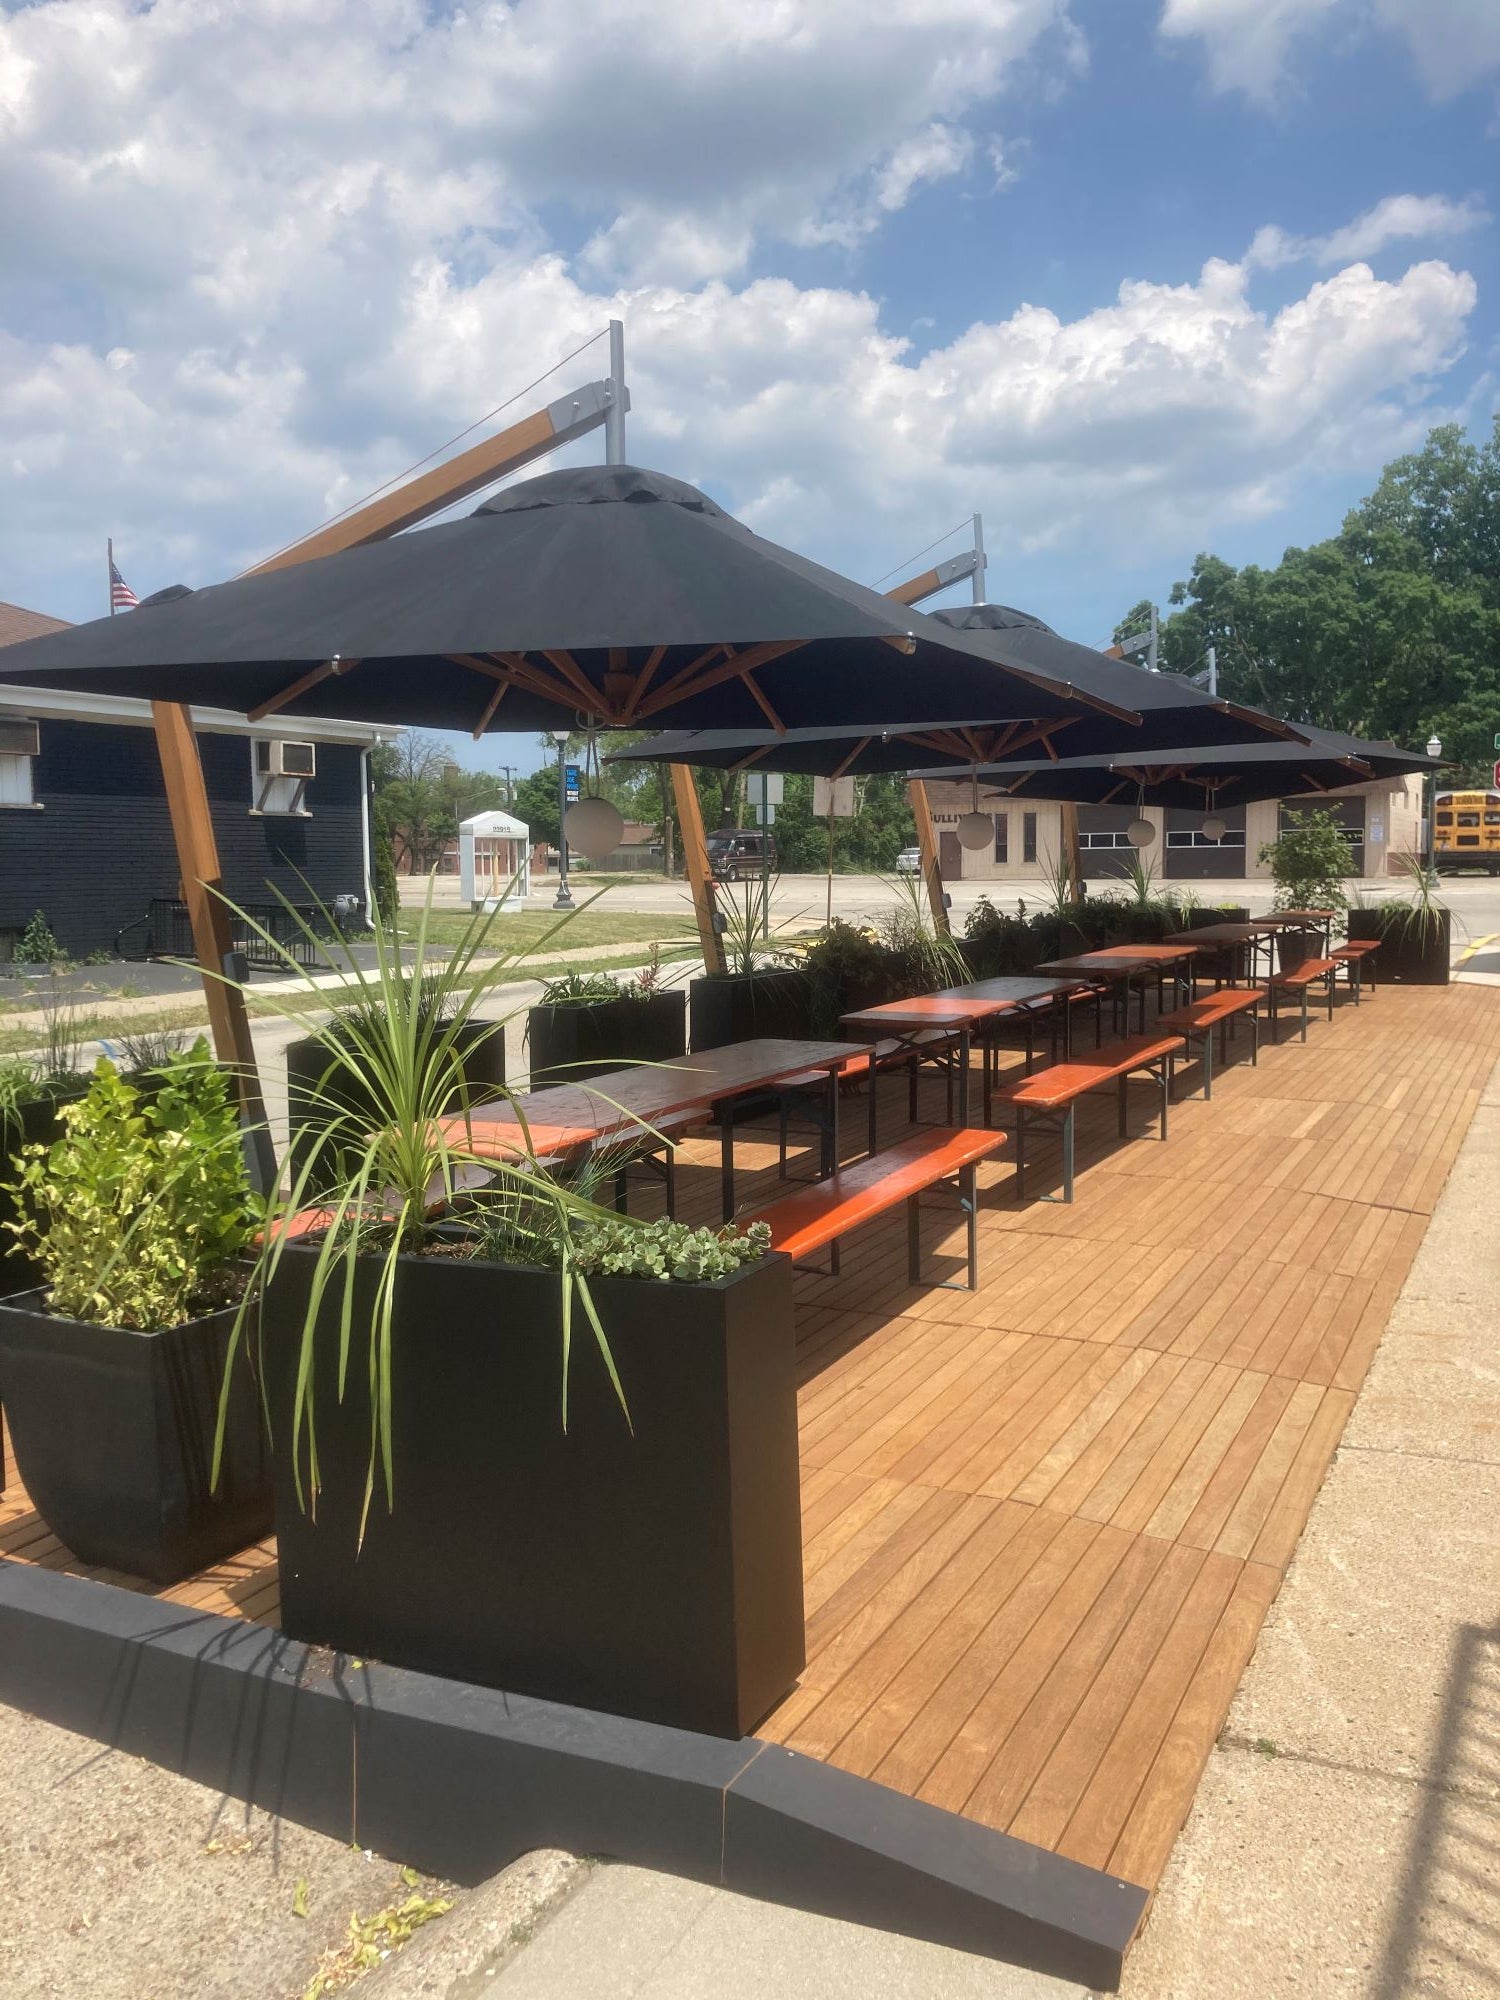 Restaurant Outdoor Patios are in, and we are proud to be a part of the movement